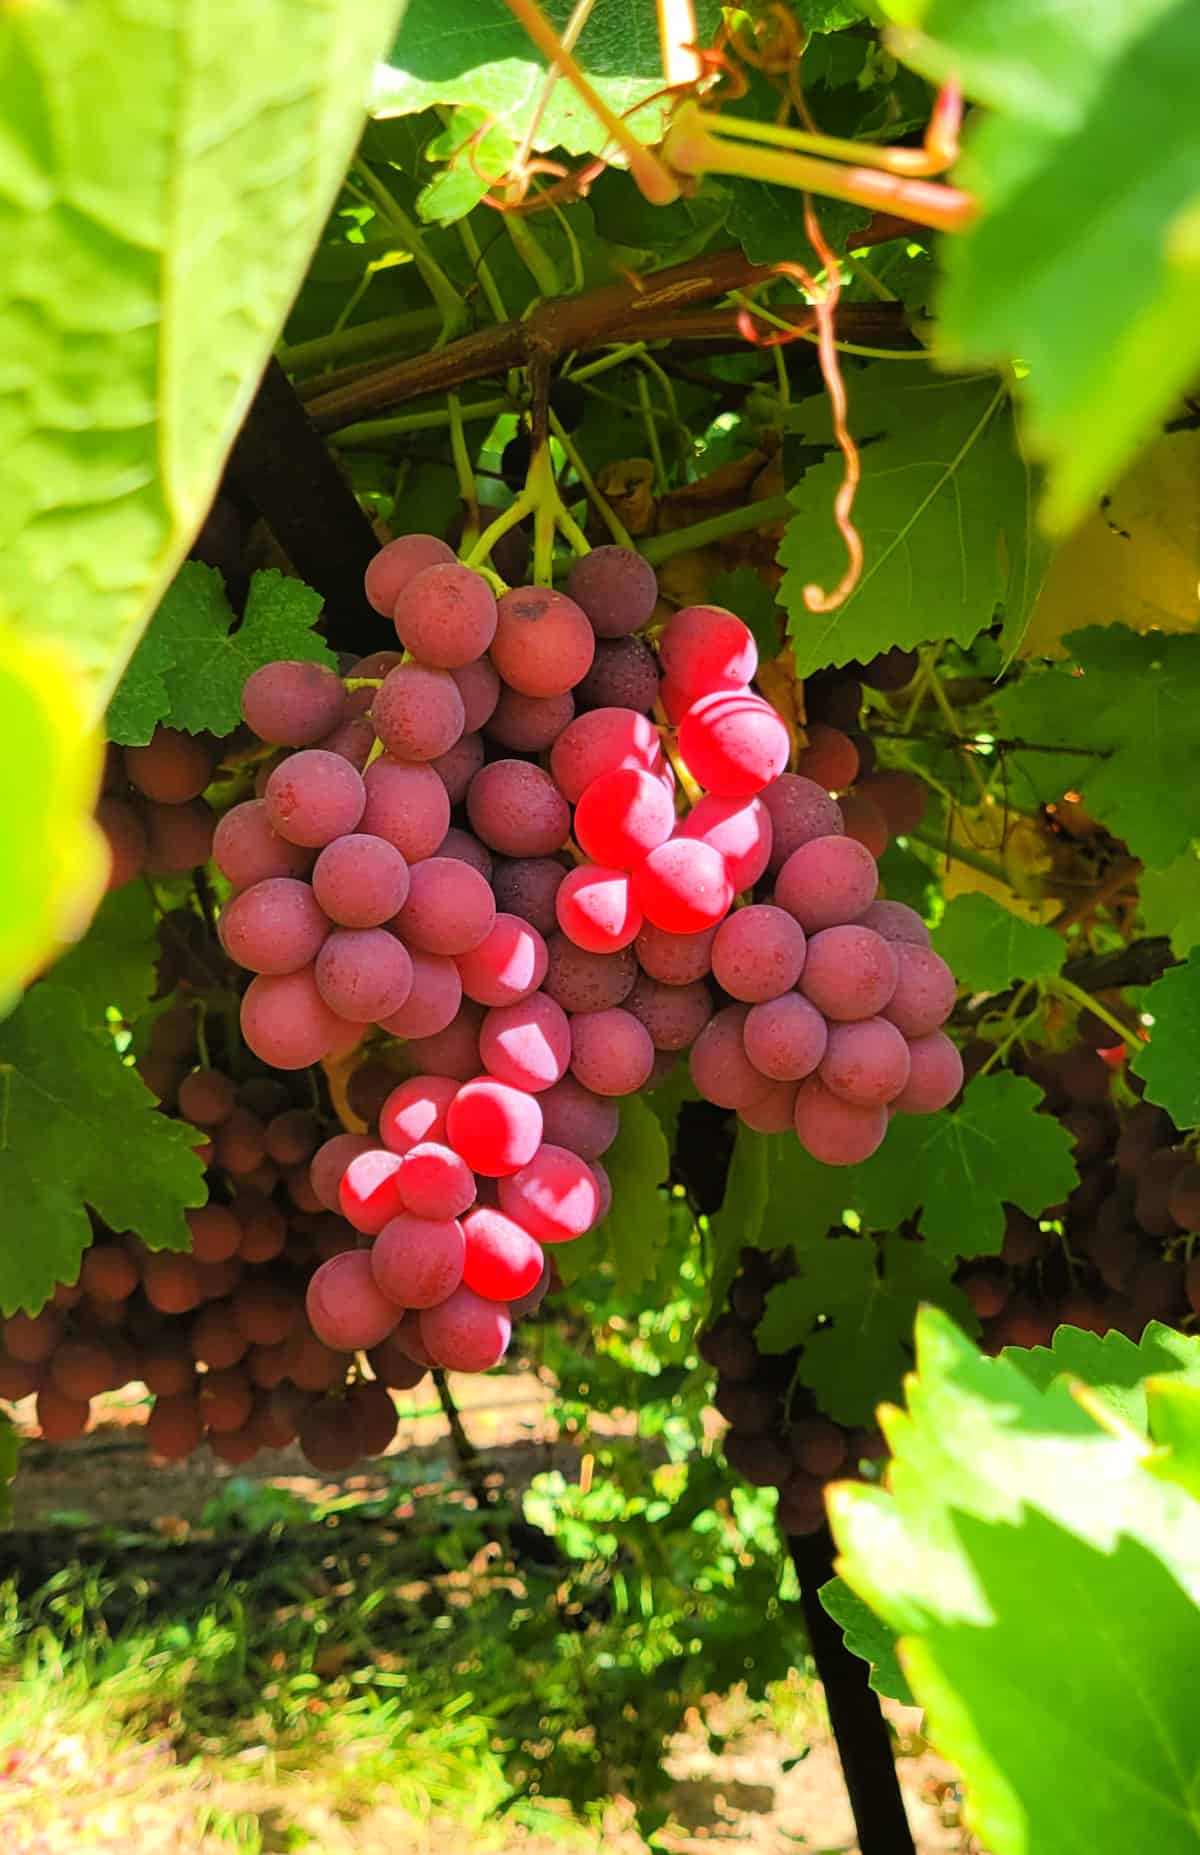 An image of a bunch of red grapes hanging on a vine.